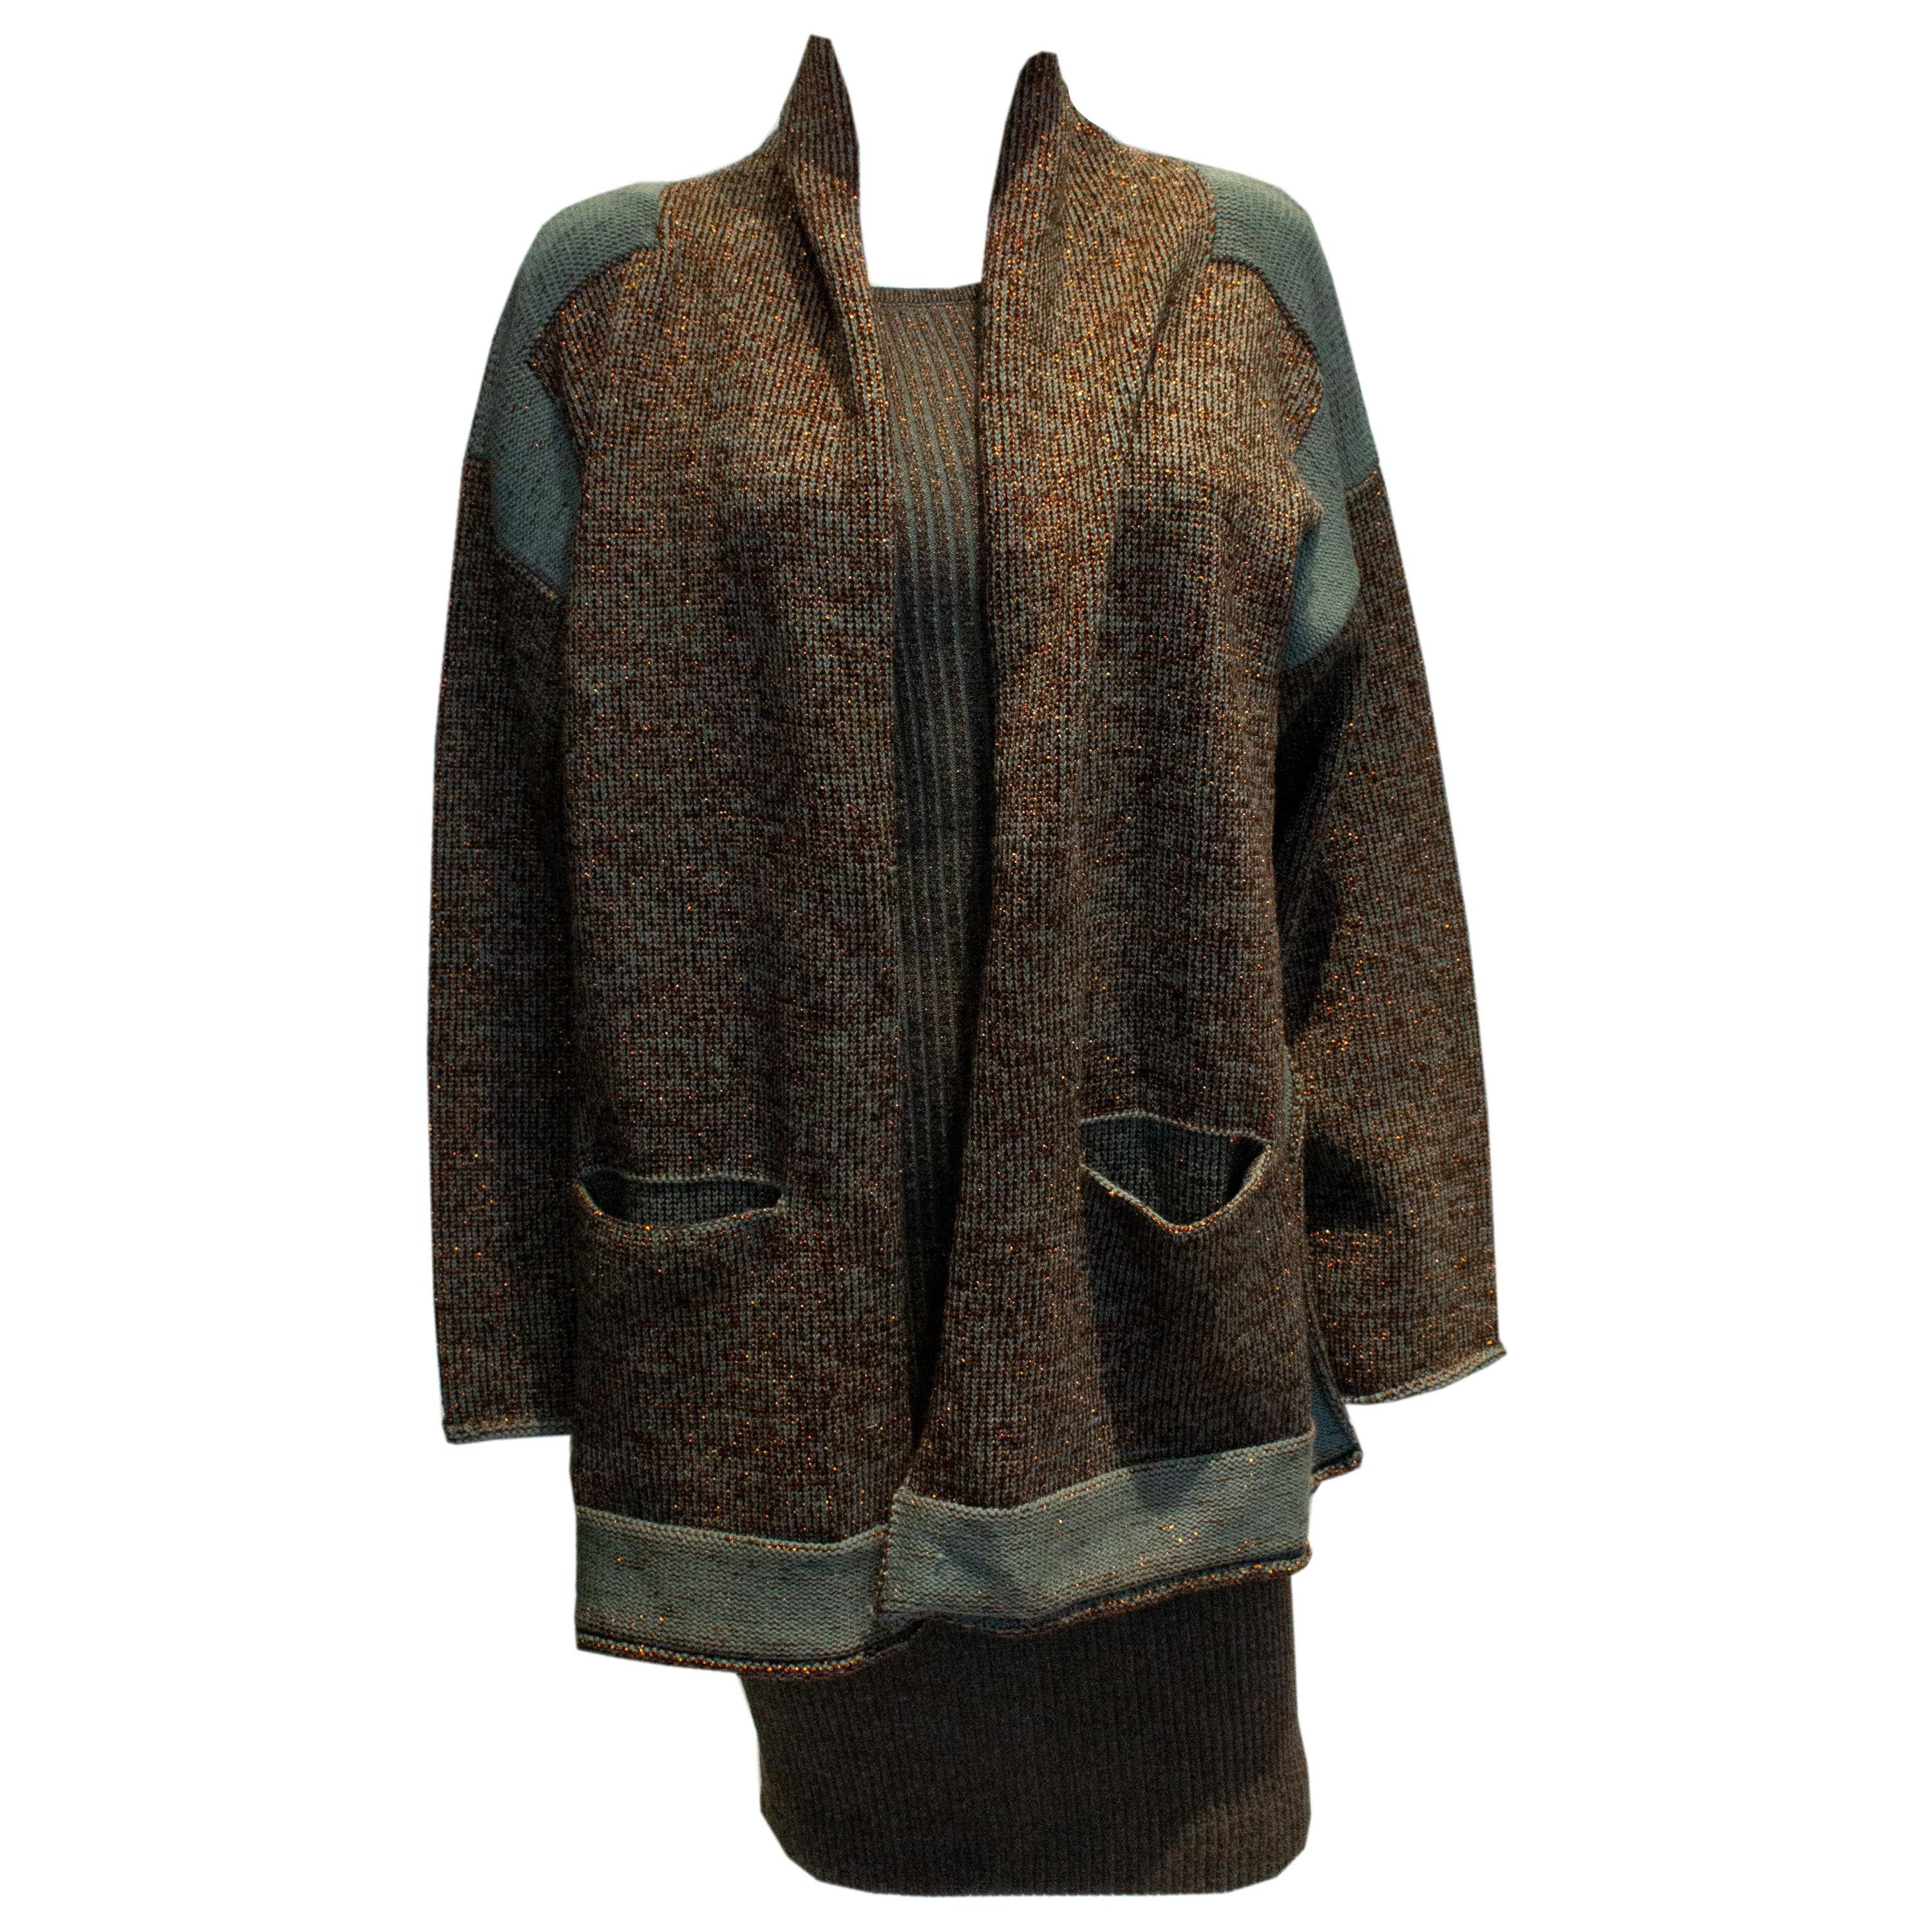 1980s Jean Paul Gaultier for Equator Knitted Dress and Jacket